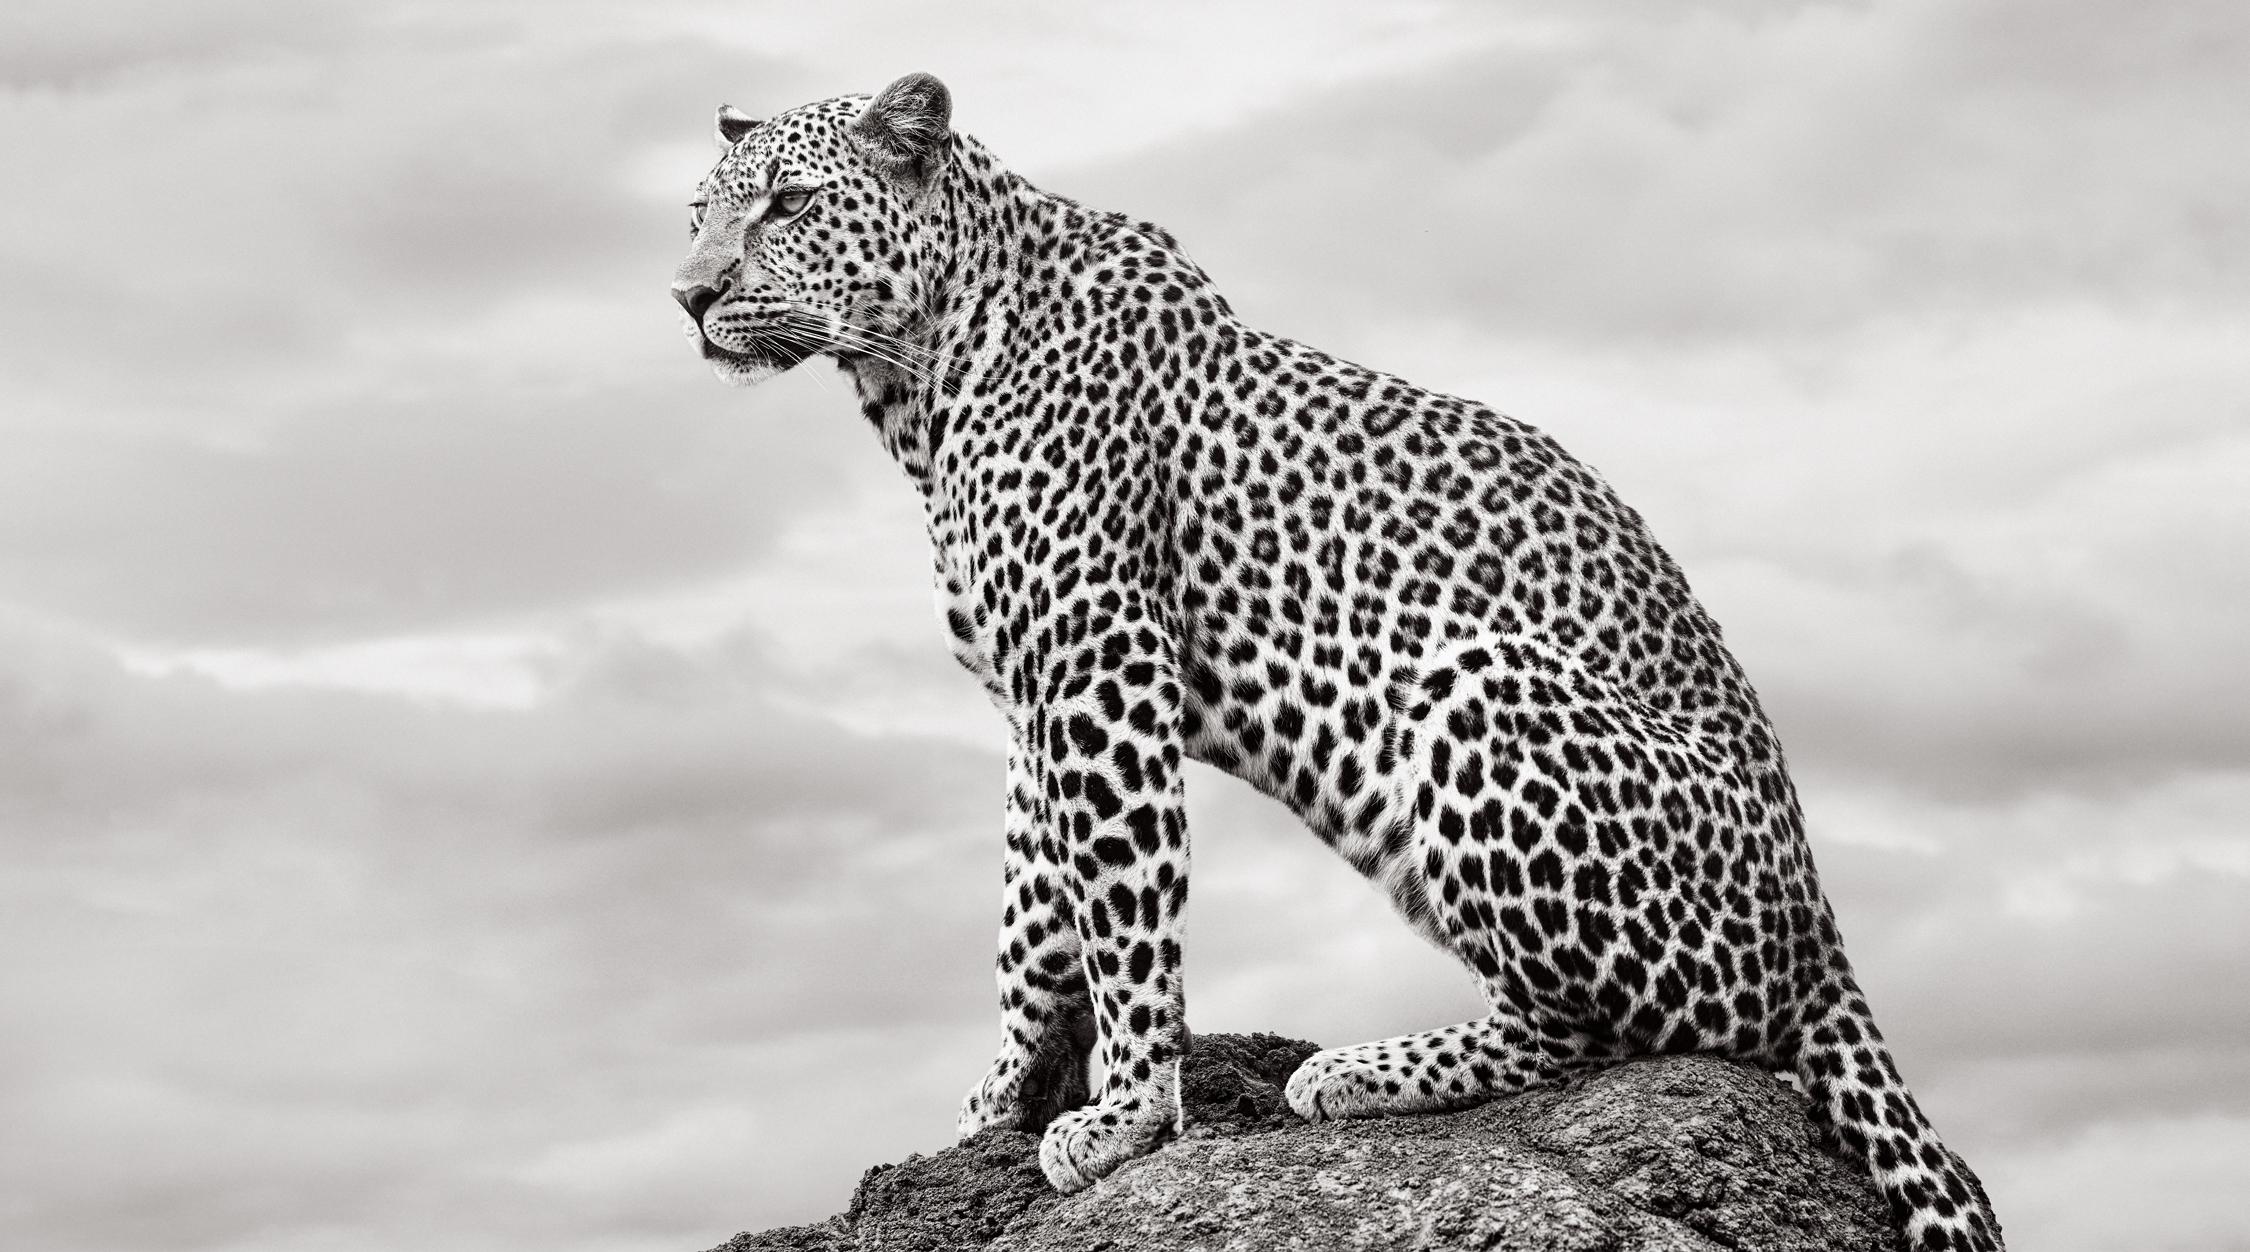 Drew Doggett Black and White Photograph - Epic portrait of a leopard sitting atop a rock, looking to the right